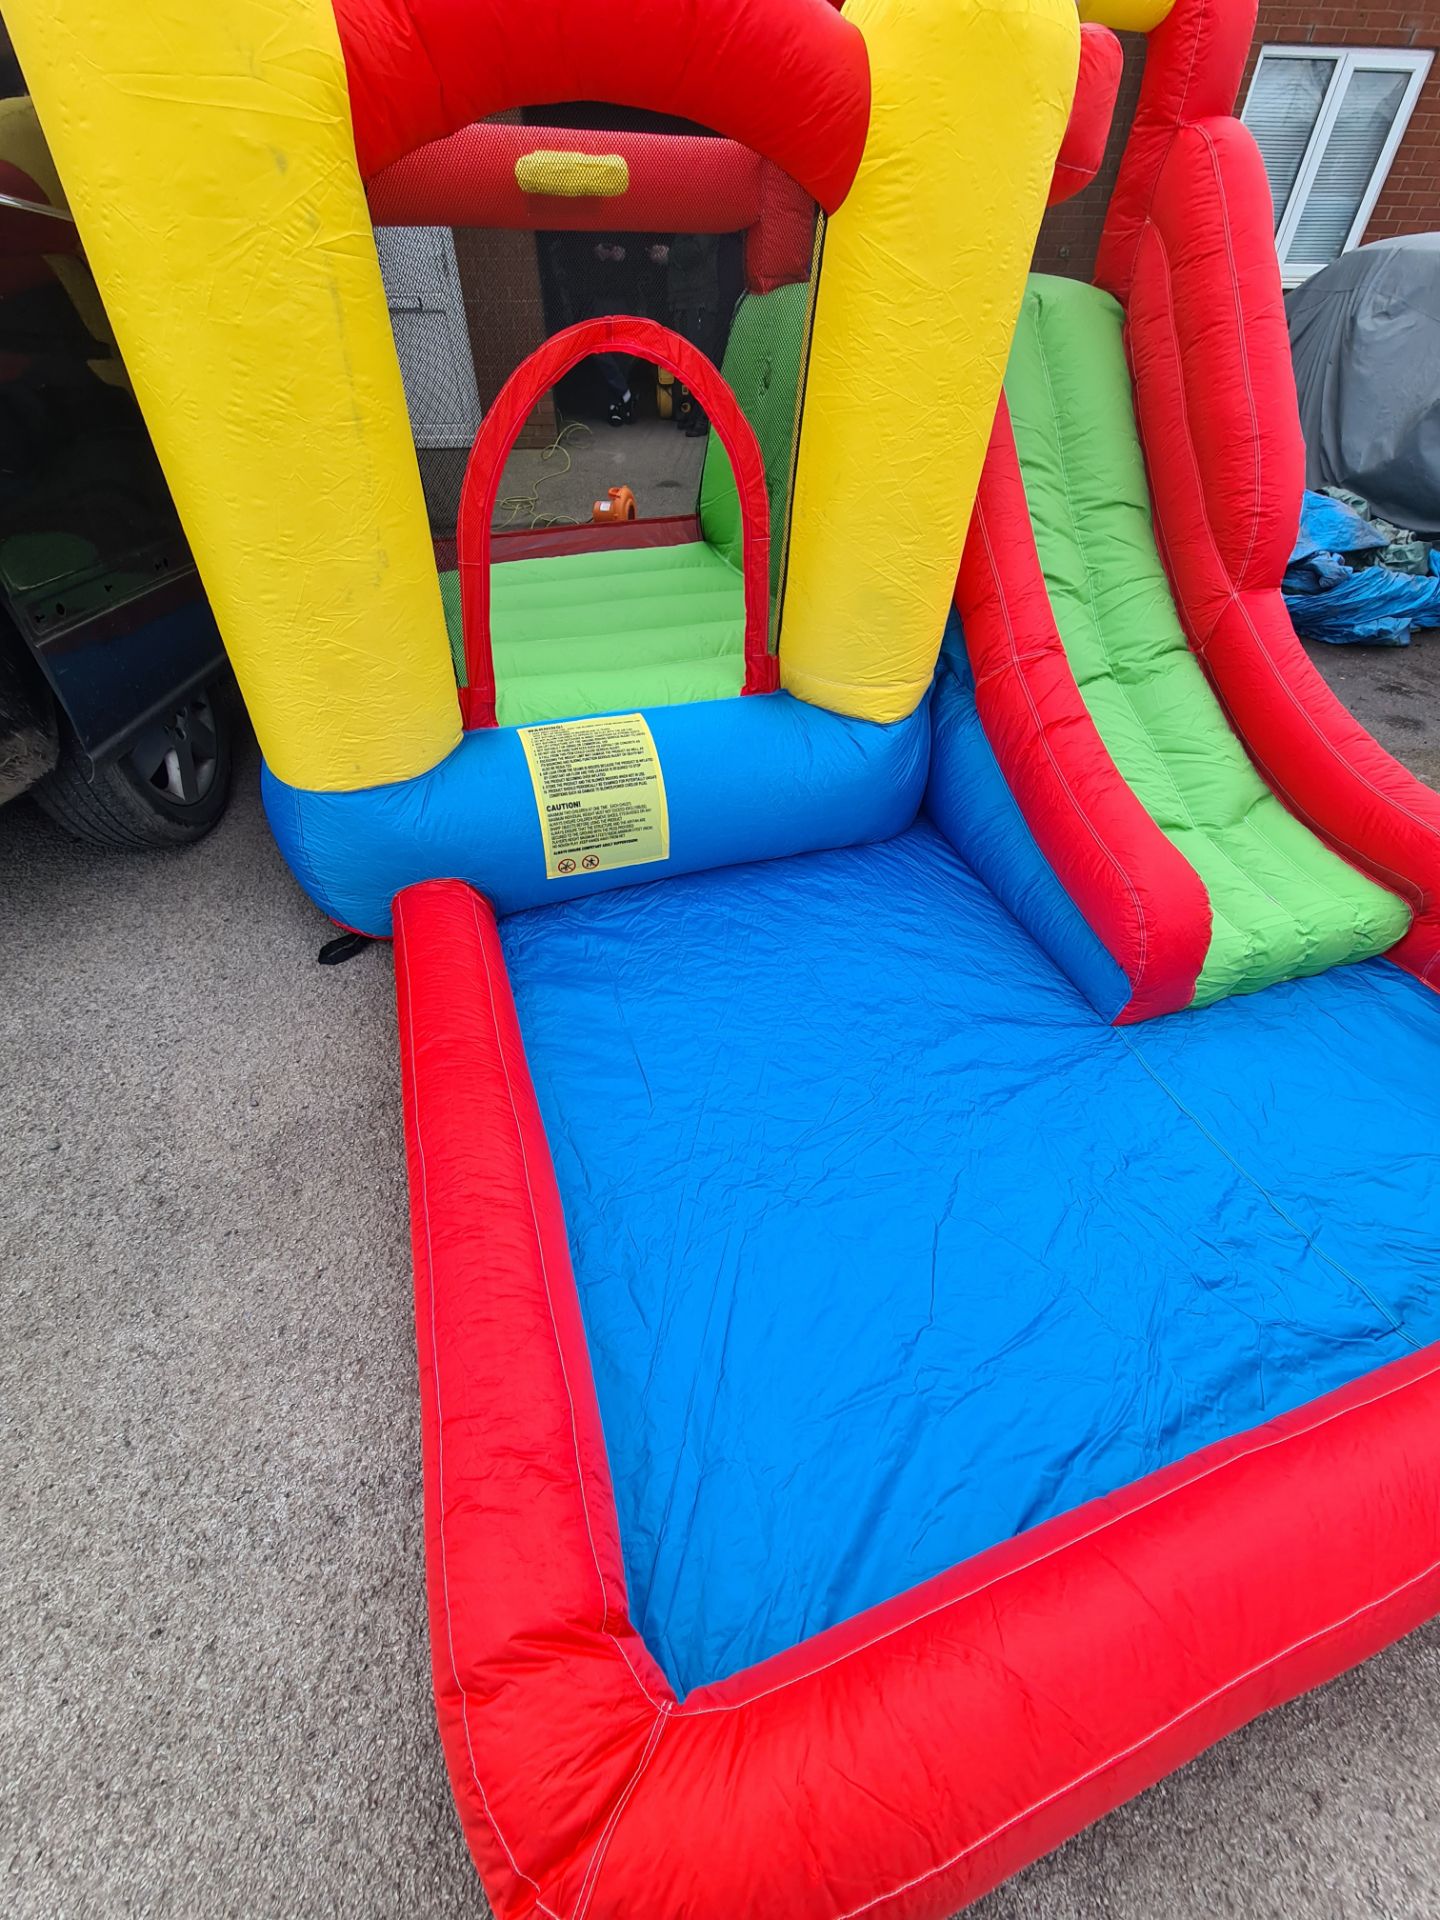 BRAND NEW - KIDS BLOW-UP WET & DRY BOUNCY PLAY AREA - NEW - Image 7 of 14